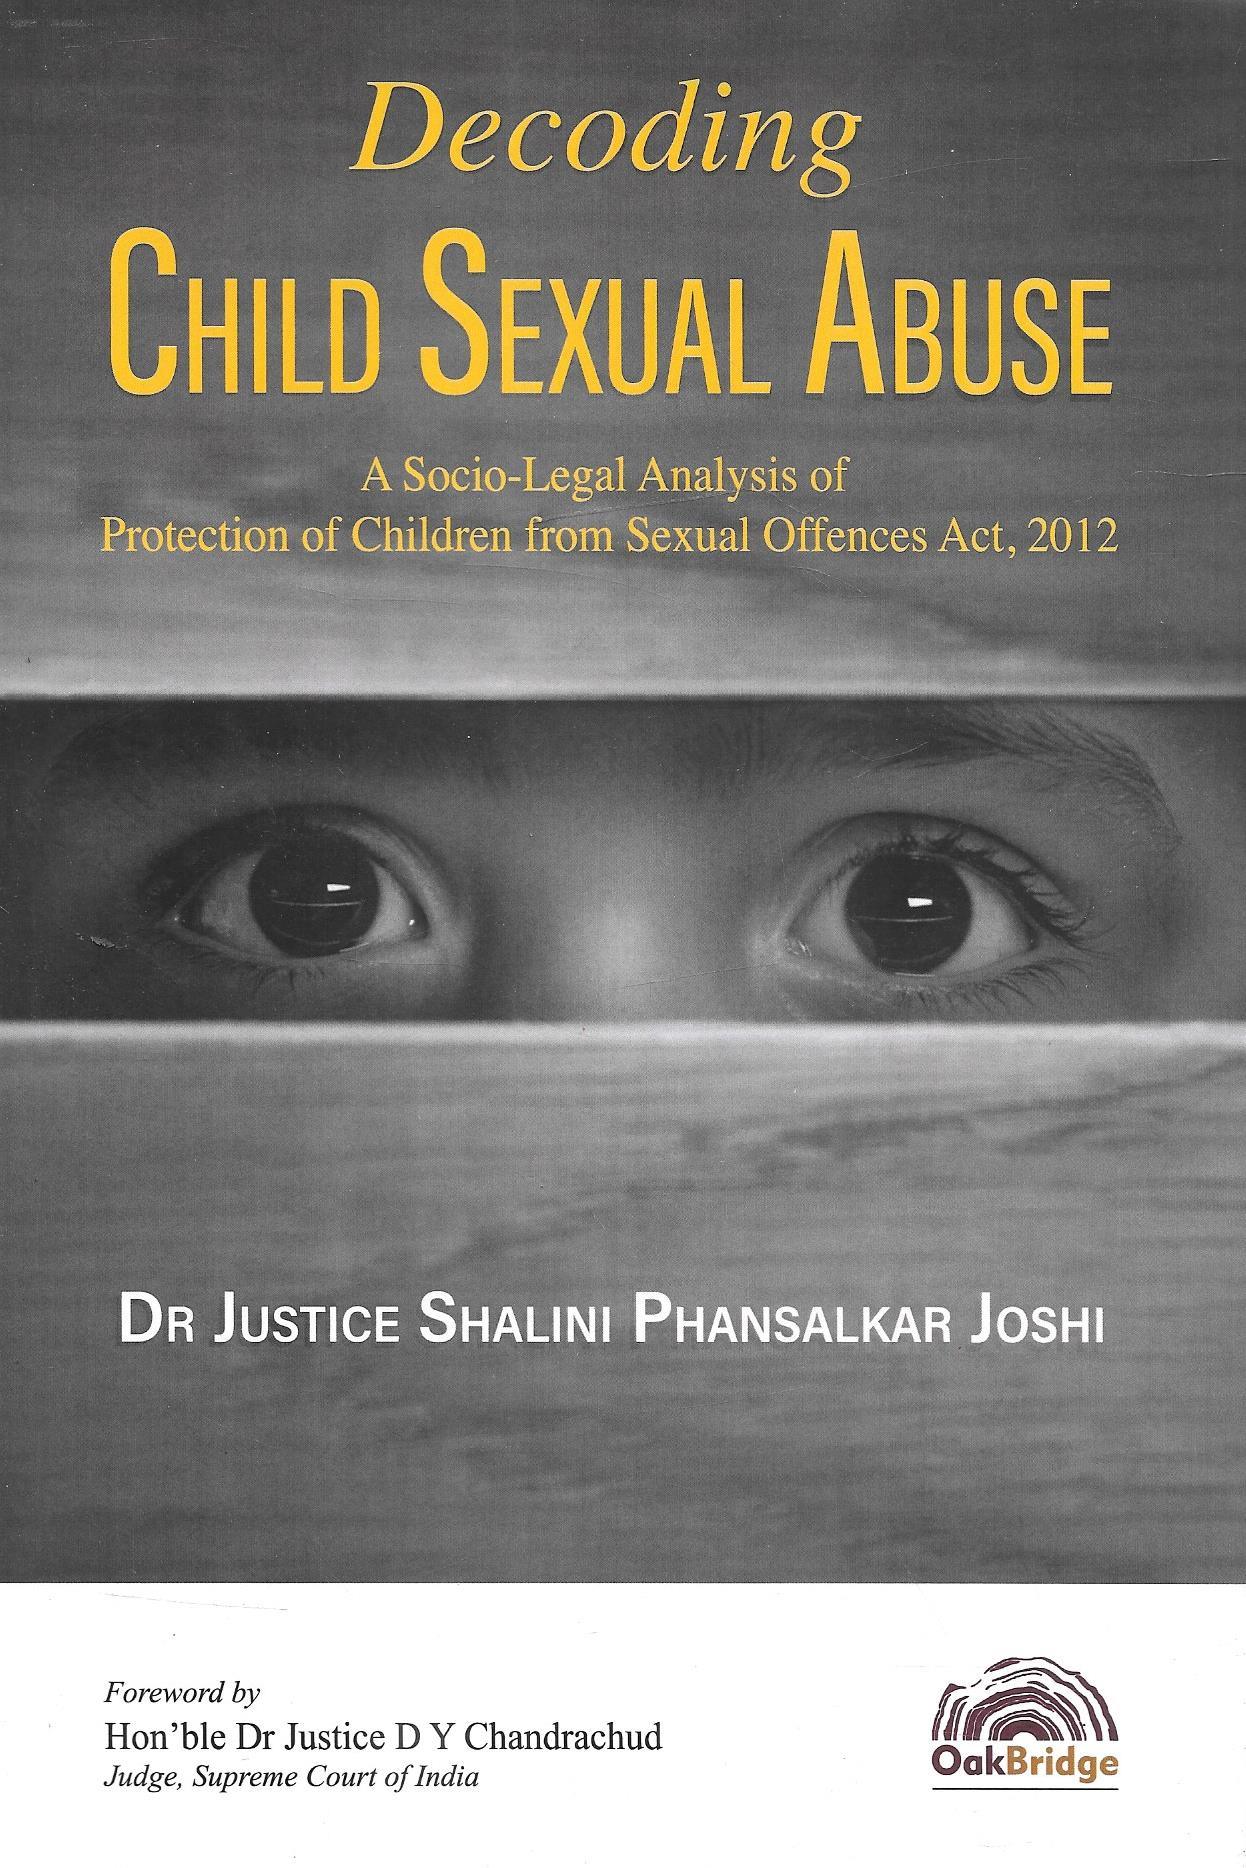 Decoding Child Sexual Abuse - A Socio Legal Analysis of Protection of Children from Sexual Offences Act, 2012 - M&J Services